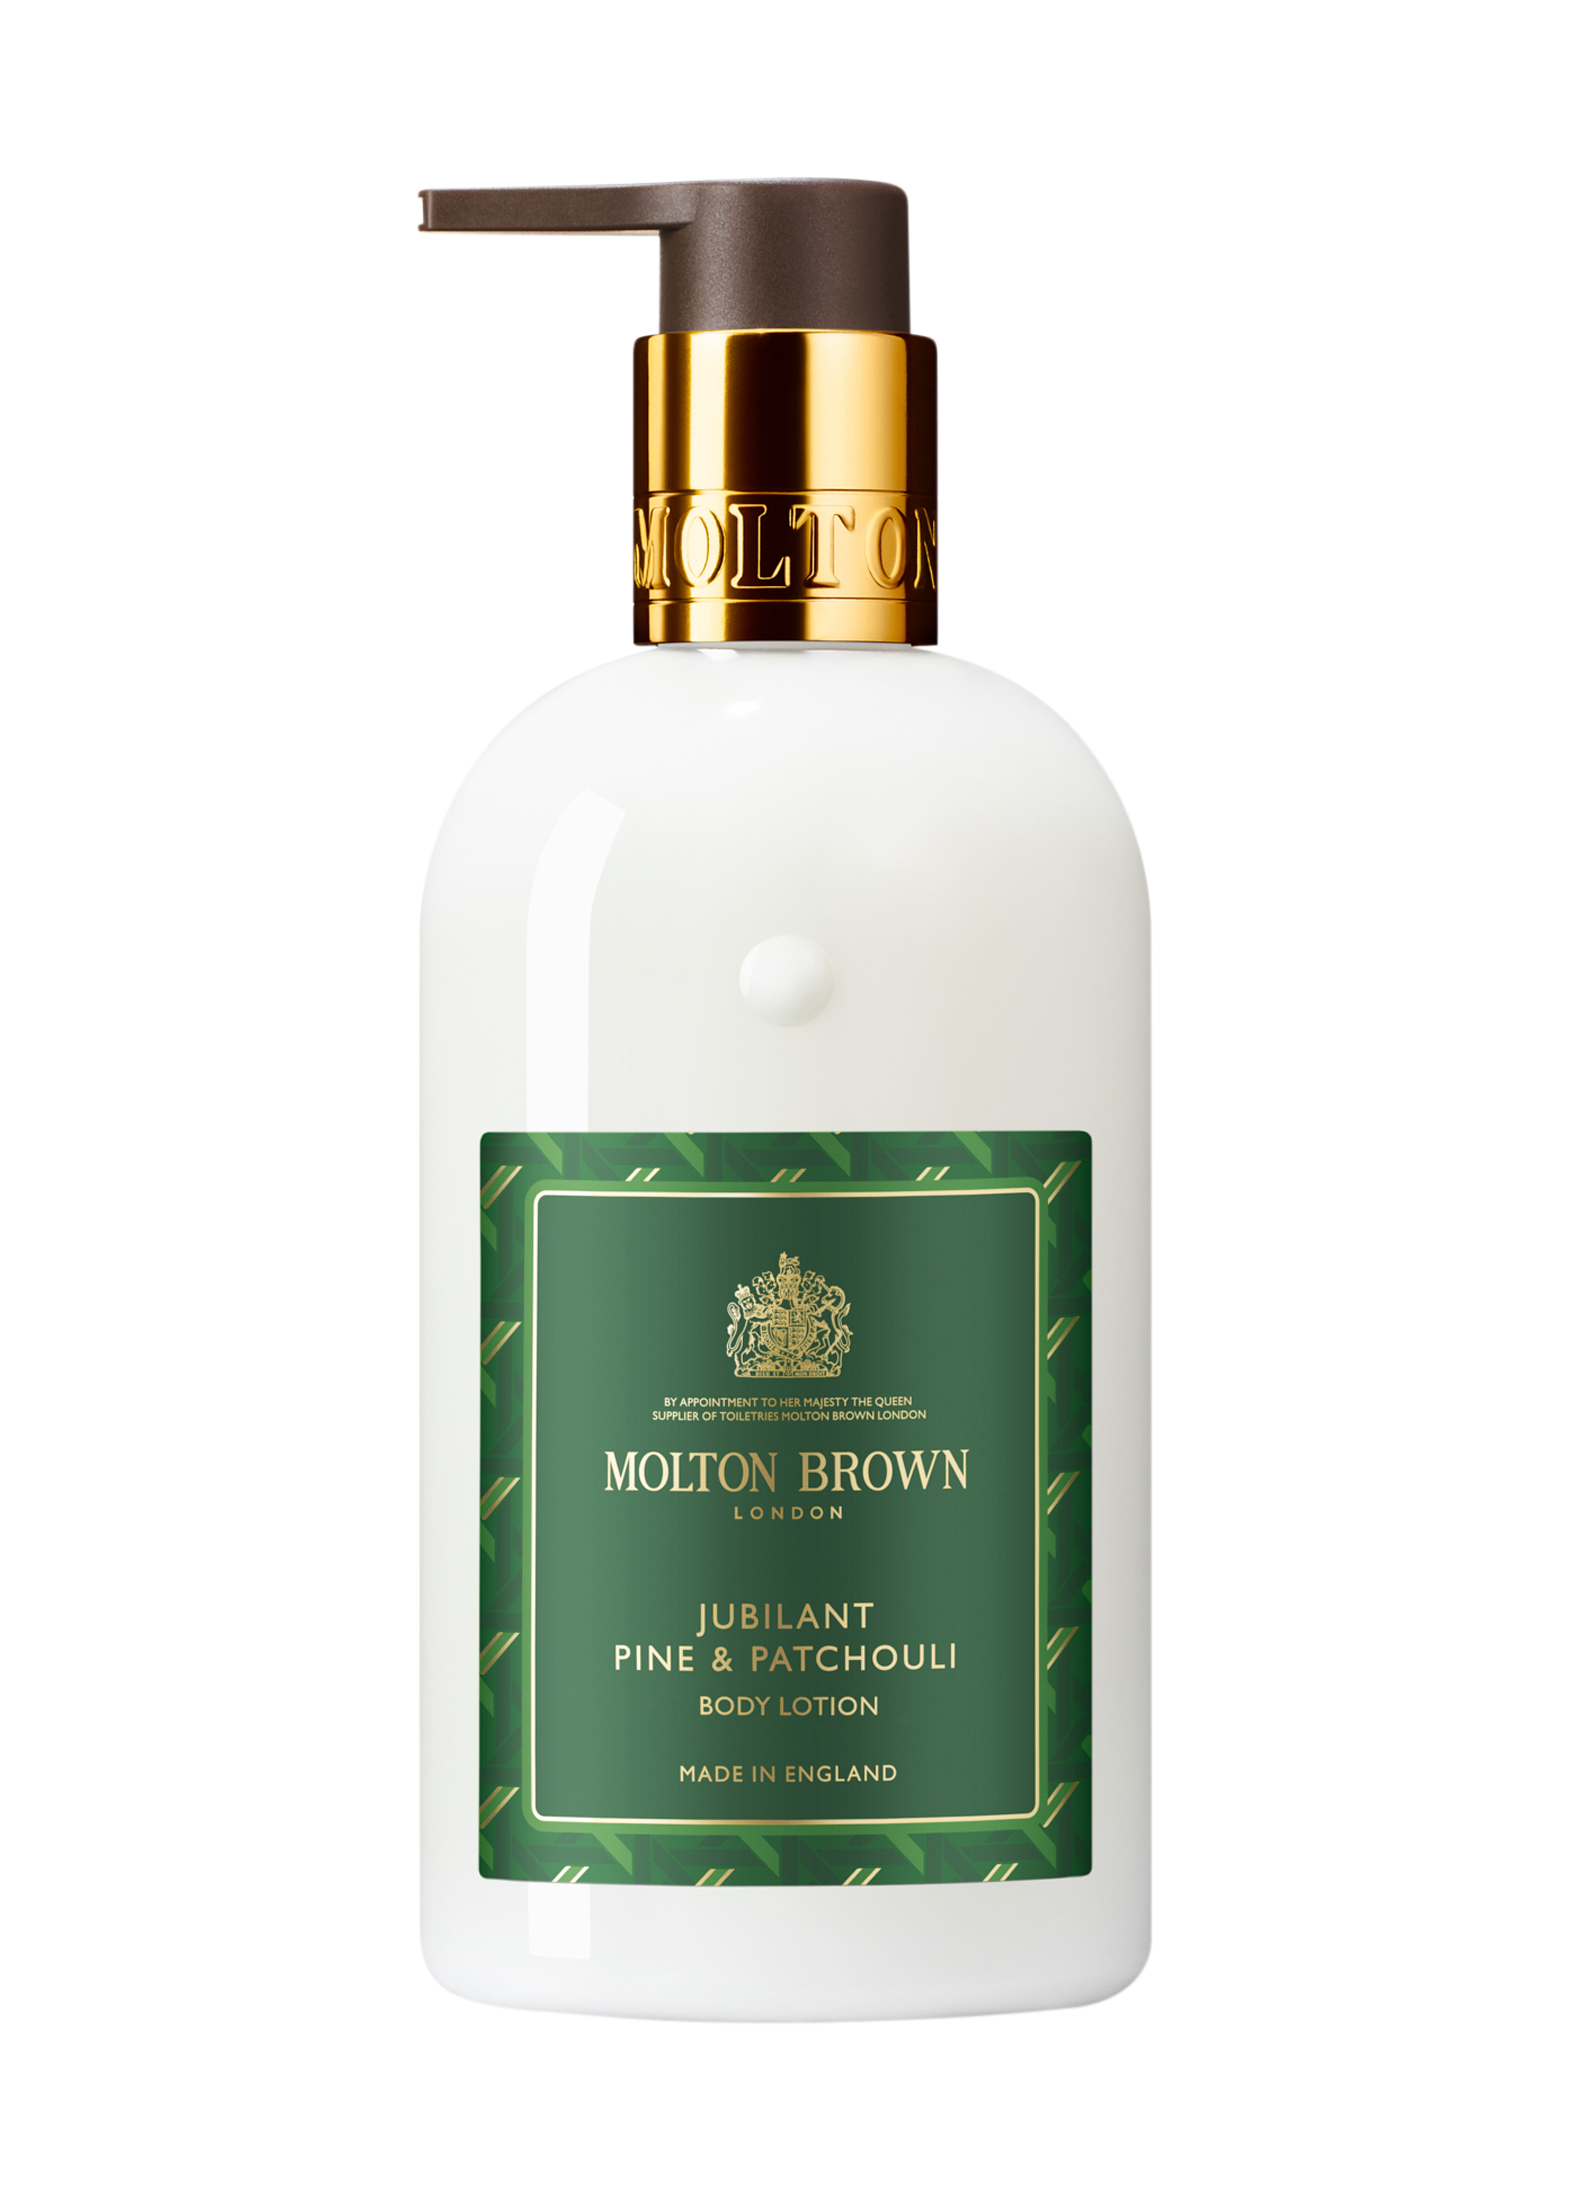 Jubilant Pine & Patchouli Body Lotion 300ml image number 0